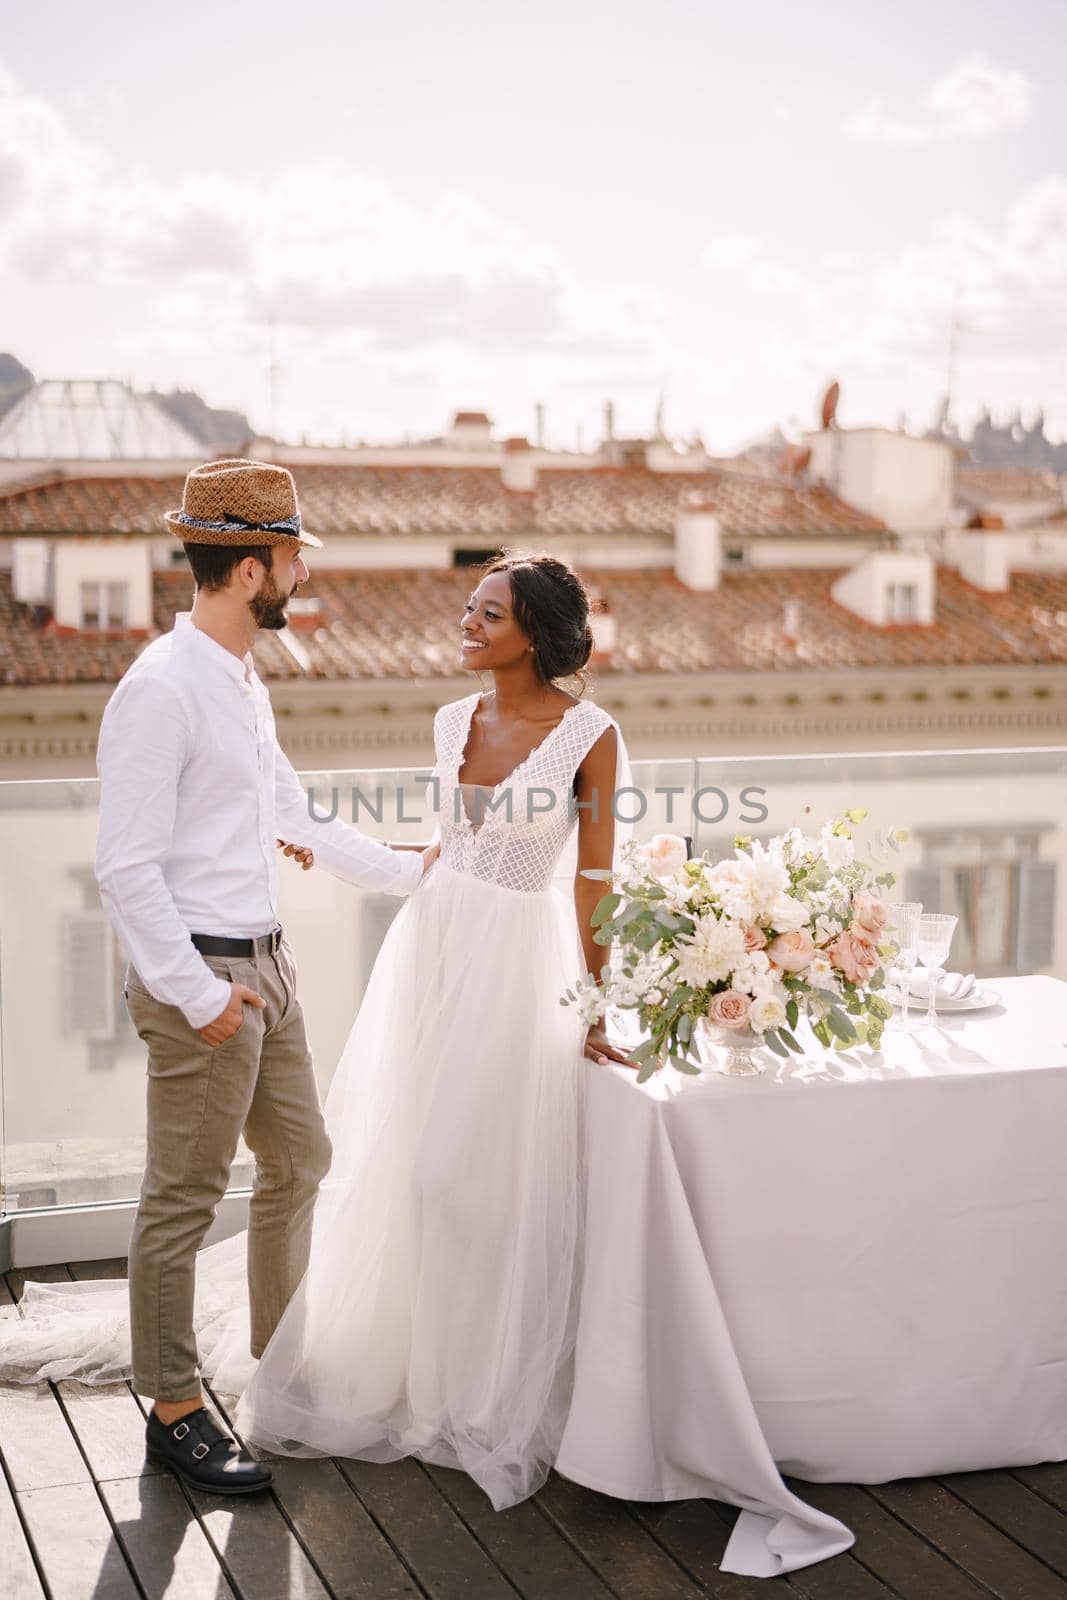 Interracial wedding couple. Destination fine-art wedding in Florence, Italy. African-American bride and Caucasian groom with a beard and straw hat, near the table for a wedding dinner. by Nadtochiy